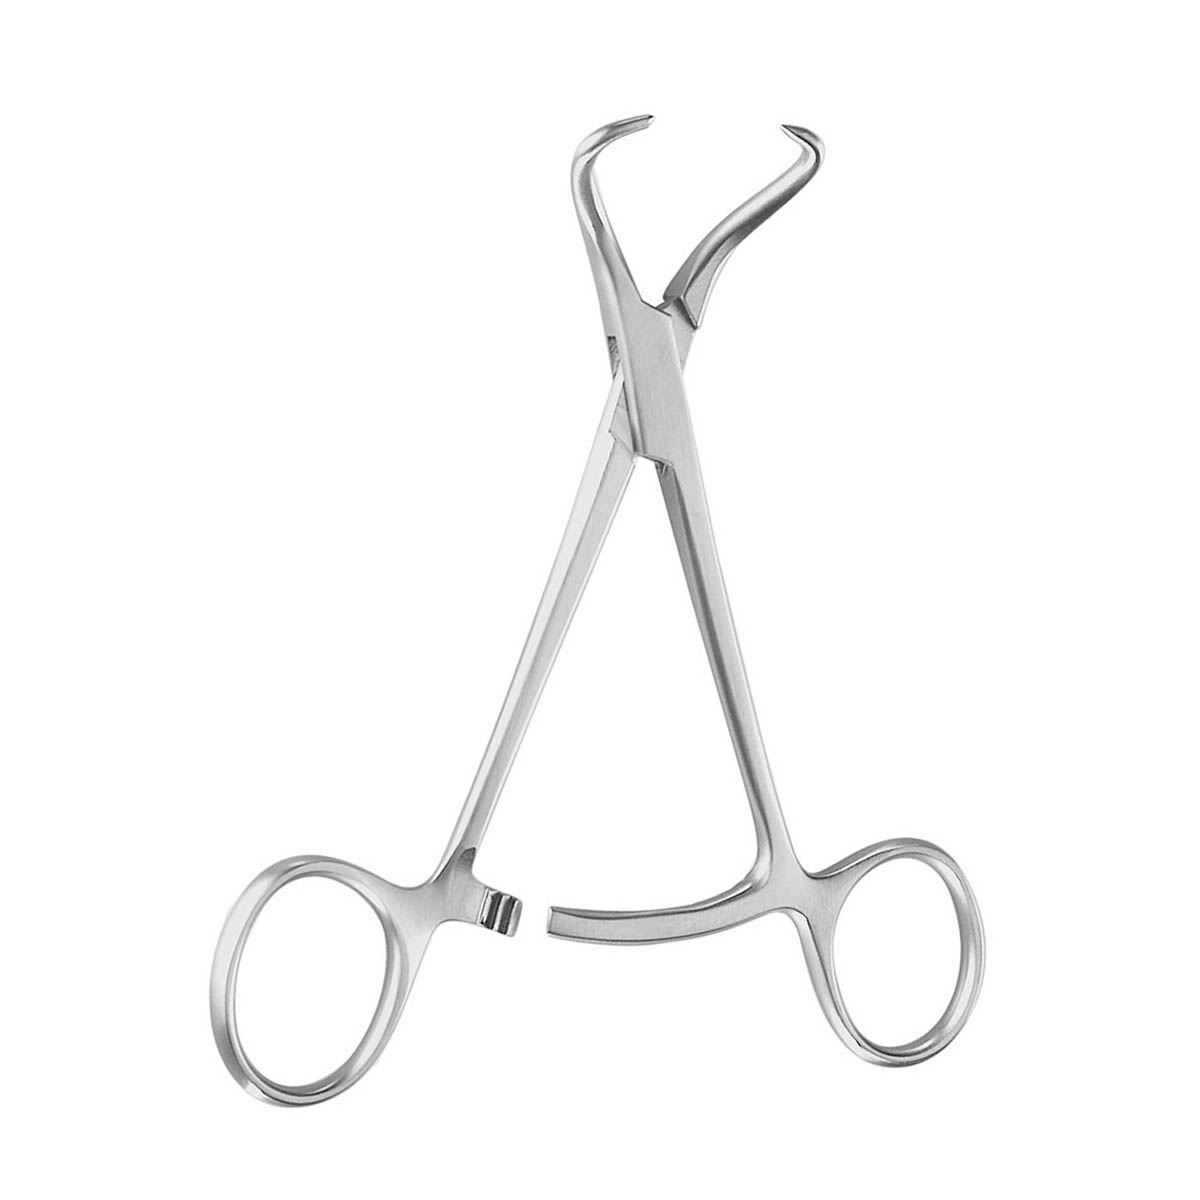 5 1/4 Bone Reduction Forceps Curved - BOSS Surgical Instruments